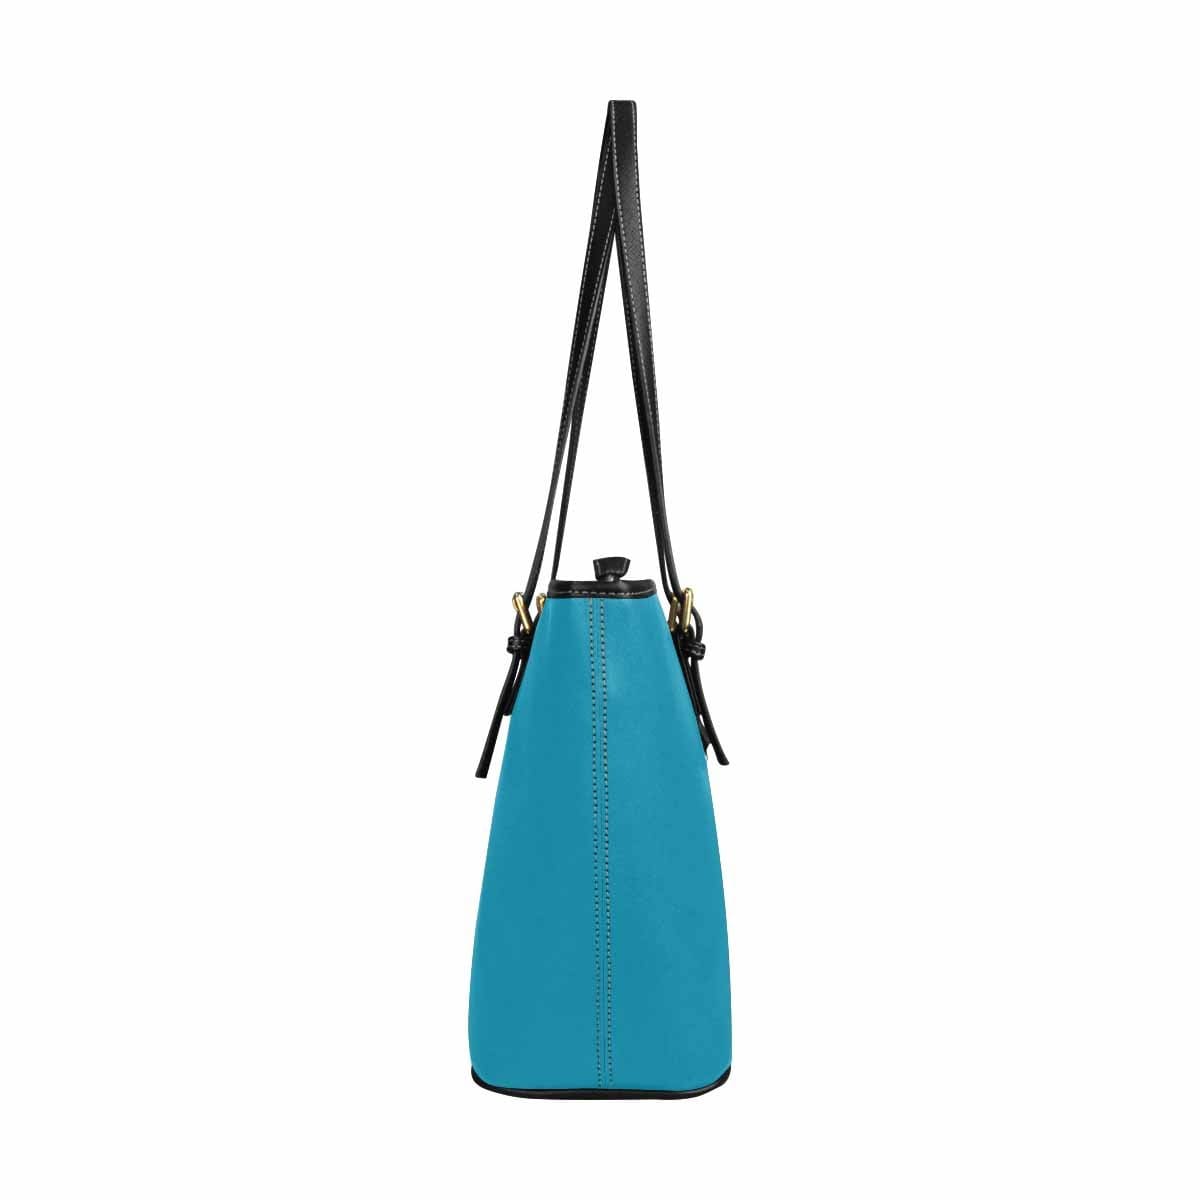 Large Leather Tote Shoulder Bag - Blue Green - Bags | Leather Tote Bags